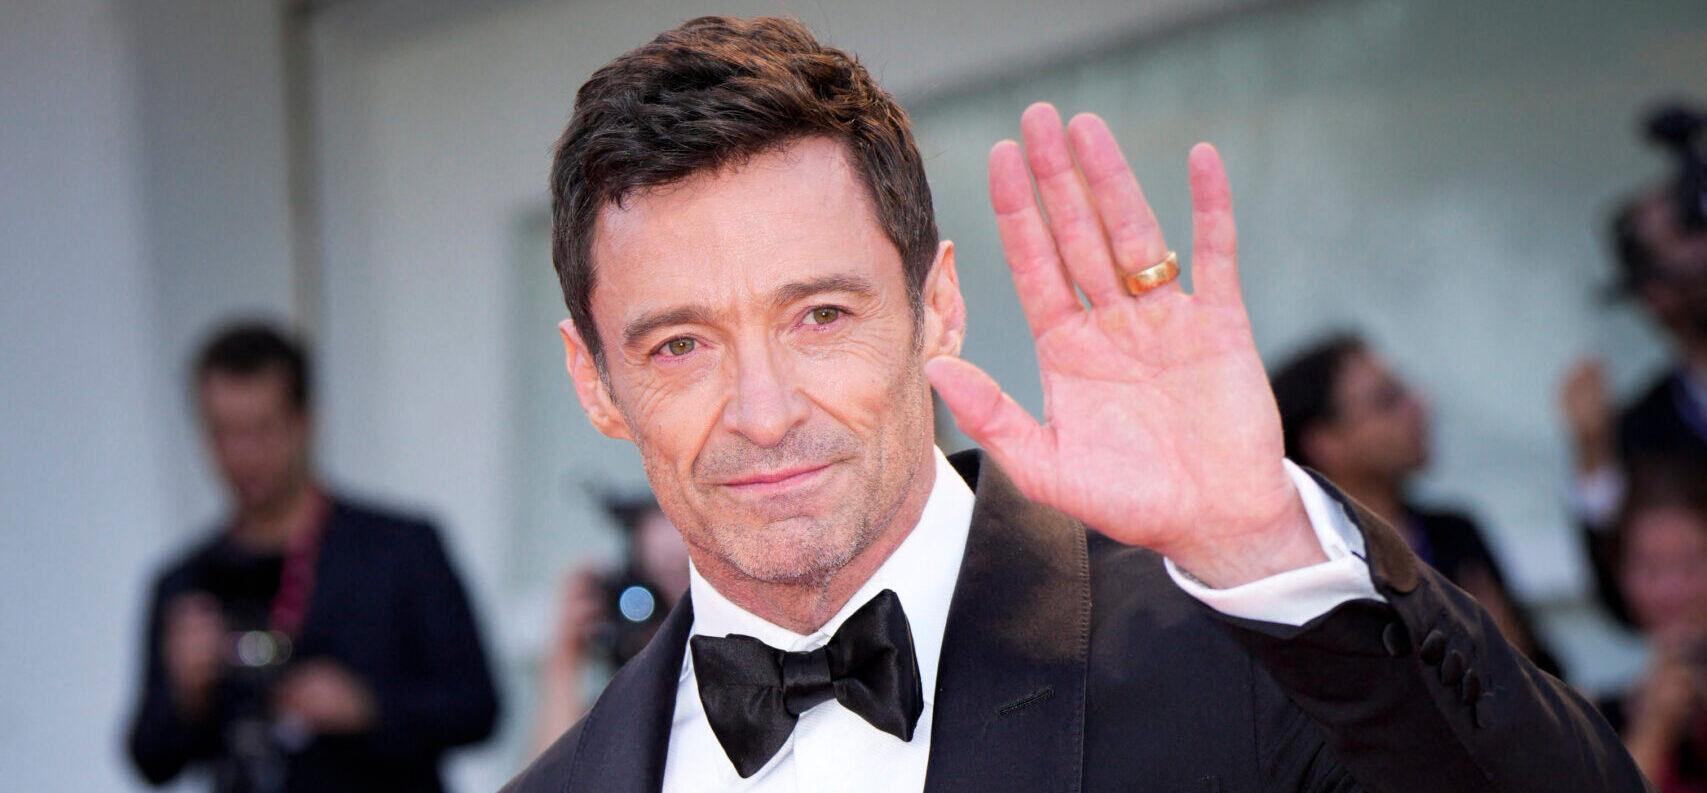 Hugh Jackman Spilling His Guts And Dropping ‘Big Bombshells’ In New Book